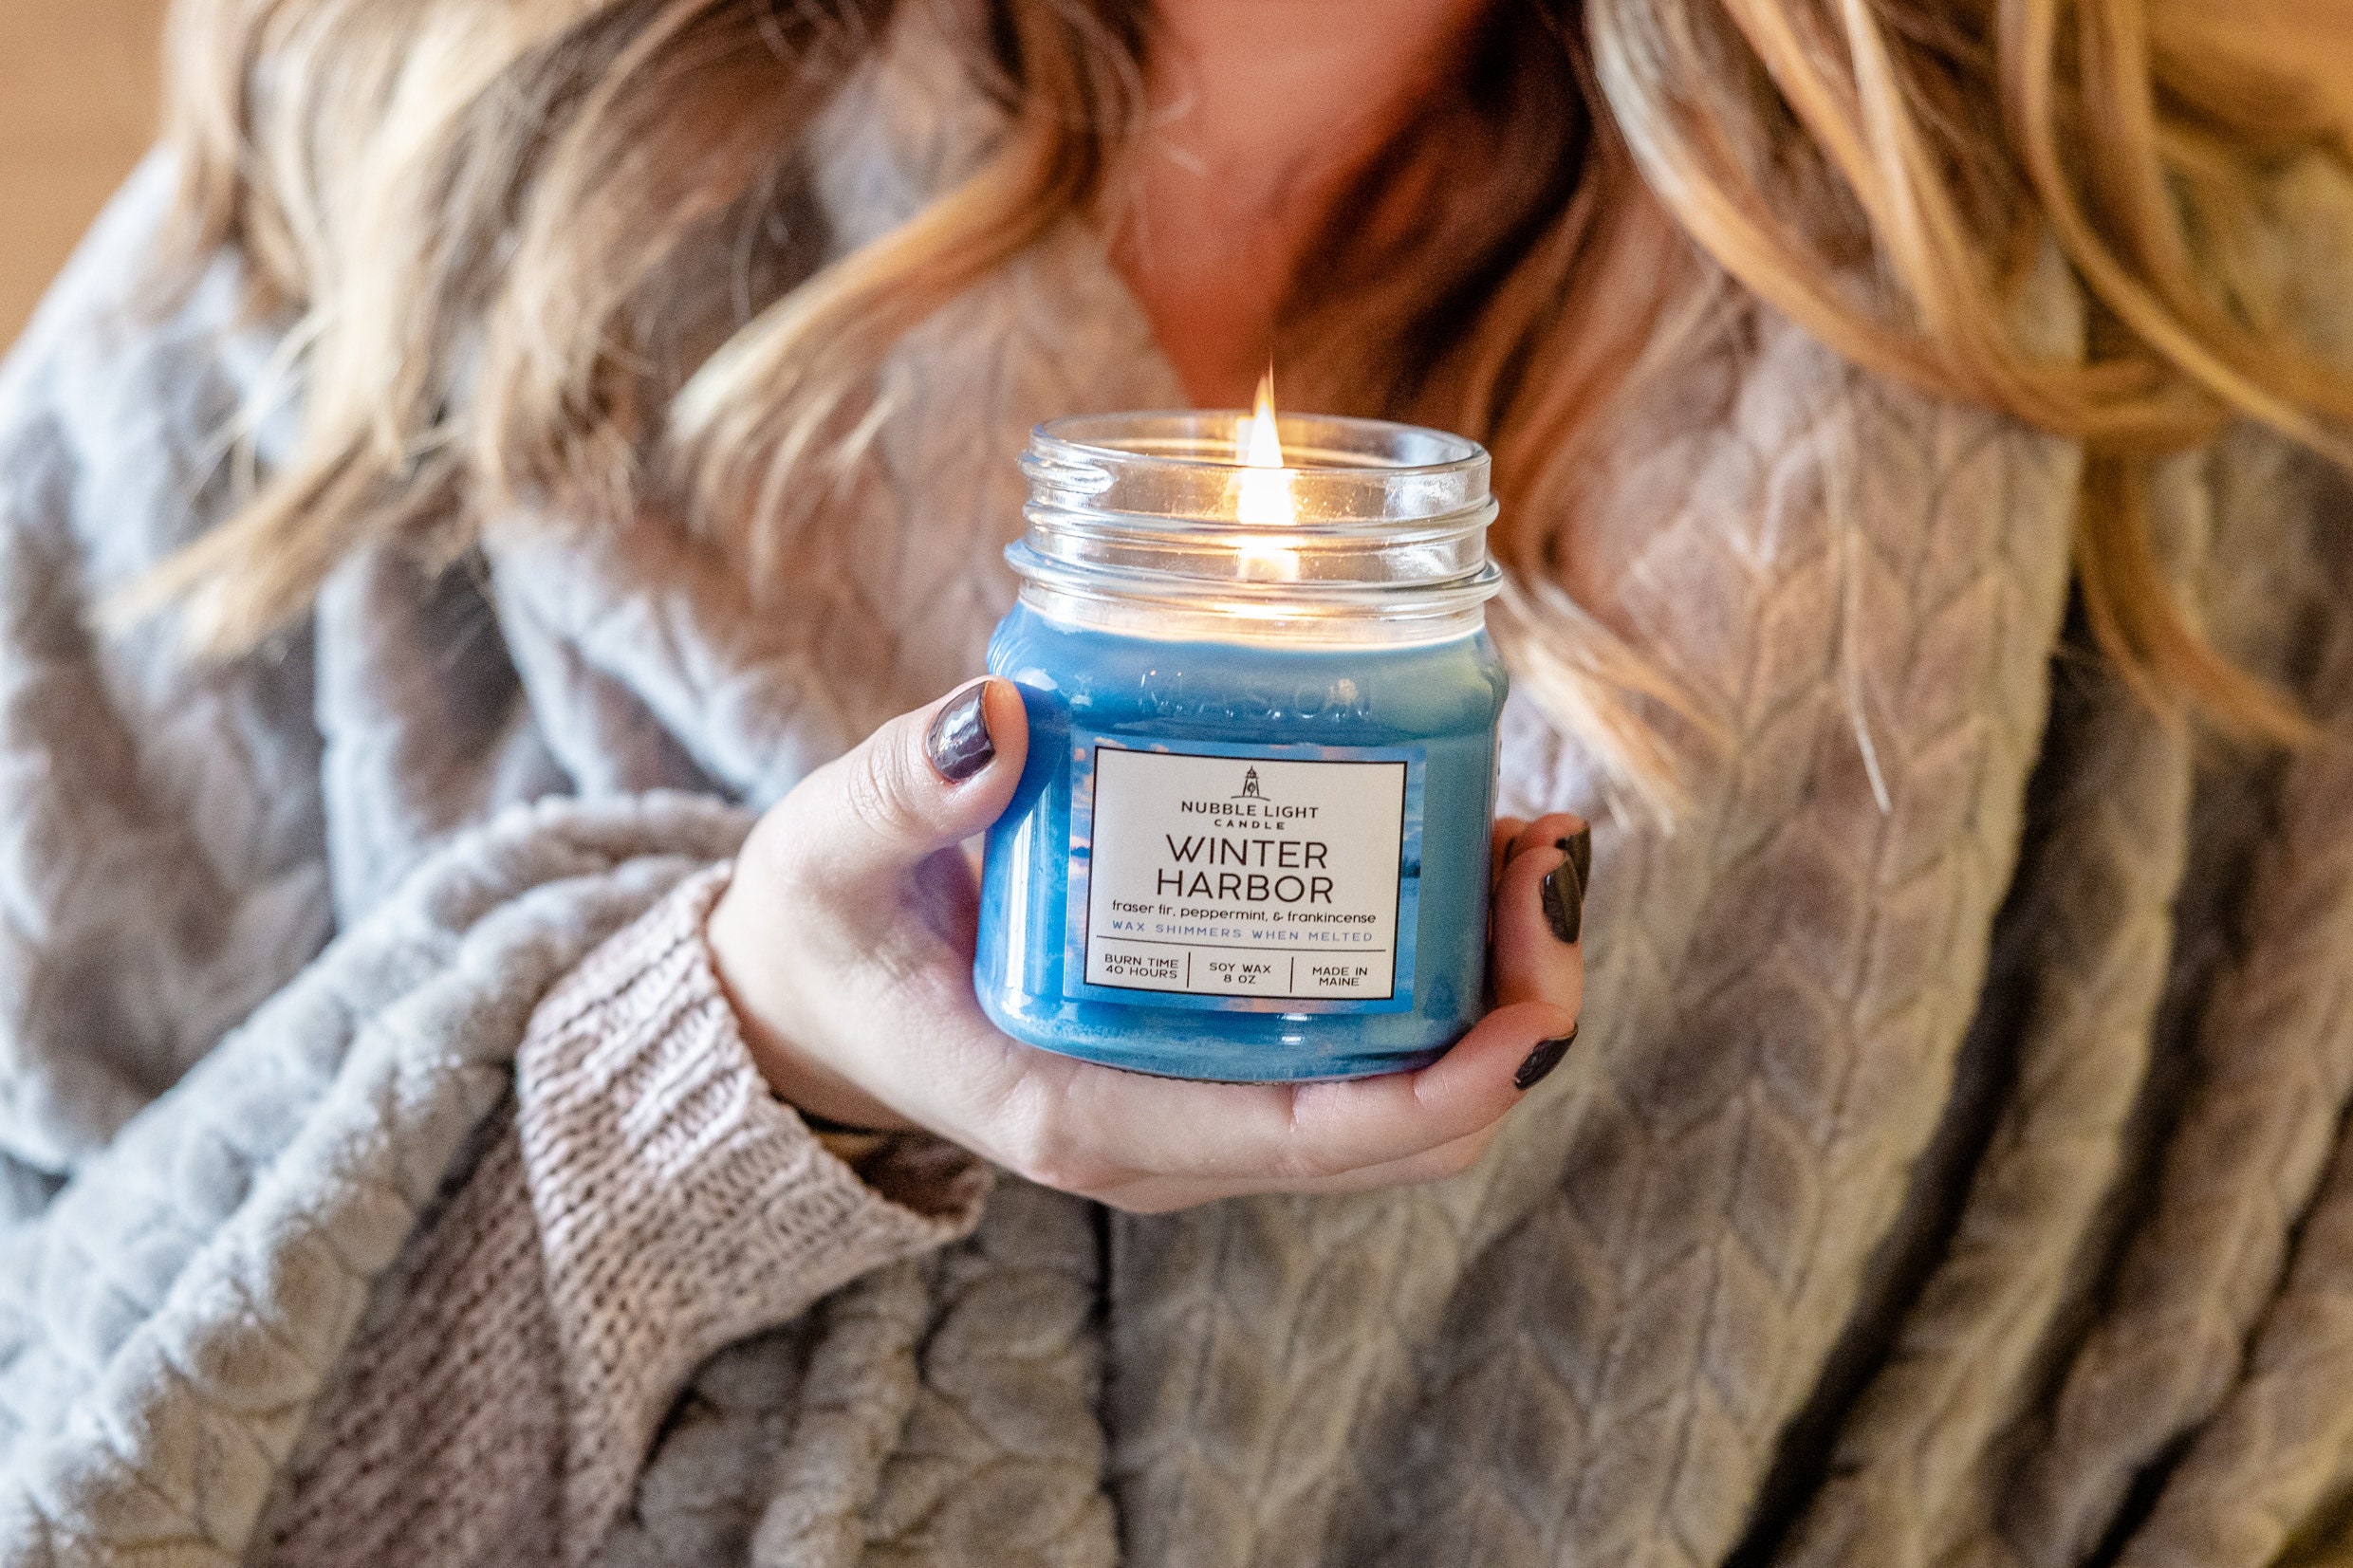 BAR HARBOR BLUEBERRY Baked Goods Scented Soy Candle Blueberry Lovers'  Candle Non-toxic Clean Burn Robust Scent Long Burn Time 